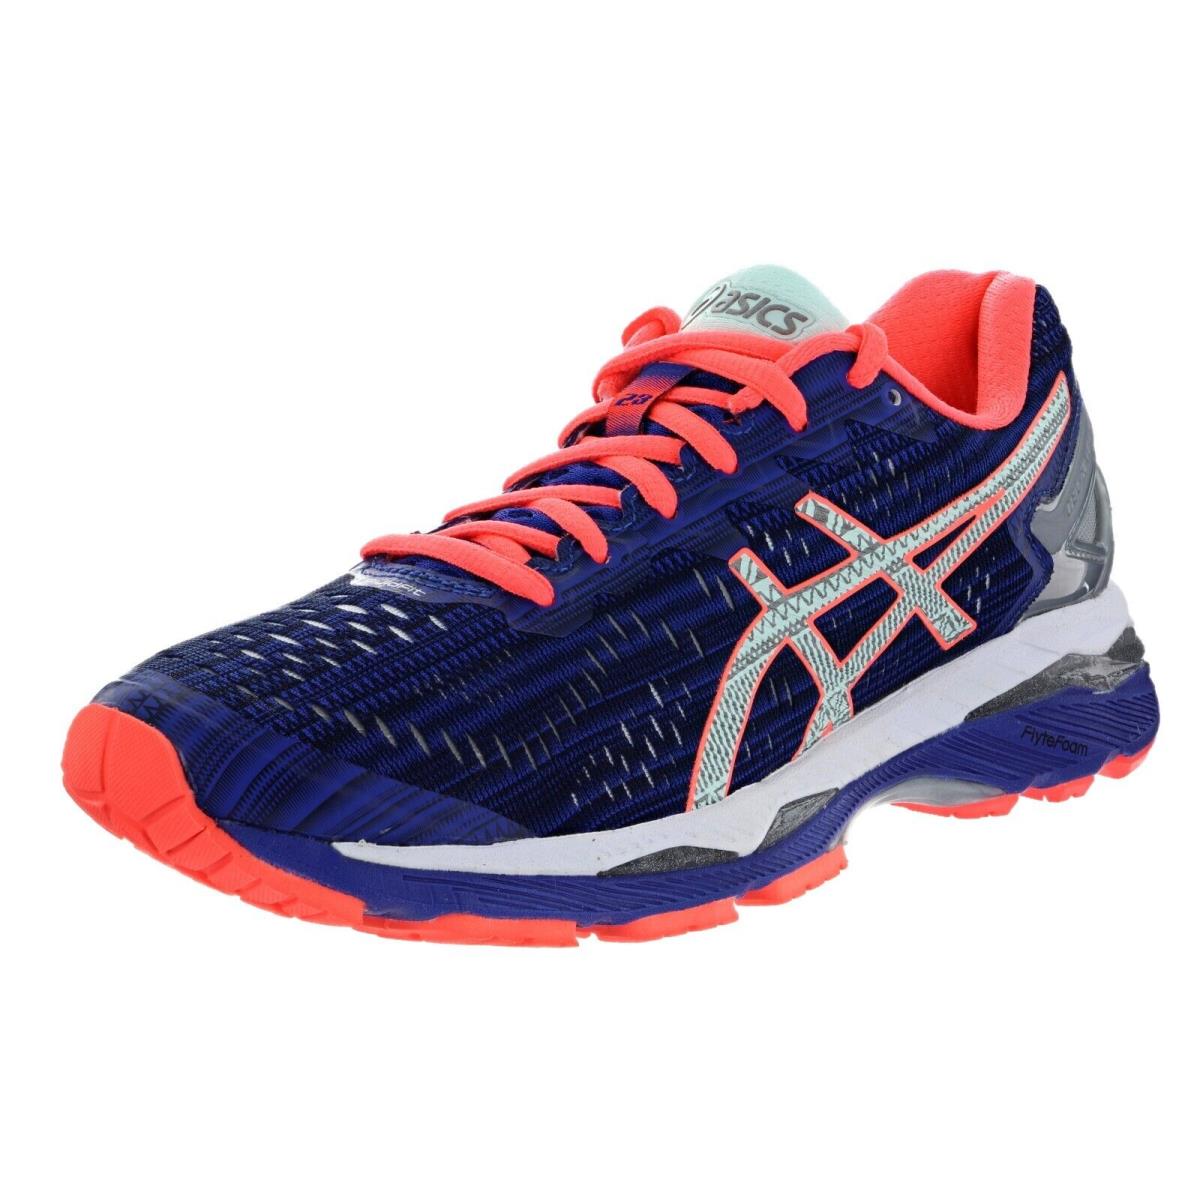 Asics Gel-kayano 23 Lite-show Women`s Size 6 Running Shoes T6A6N-4593 - Asics Blue, Silver, Flash Coral